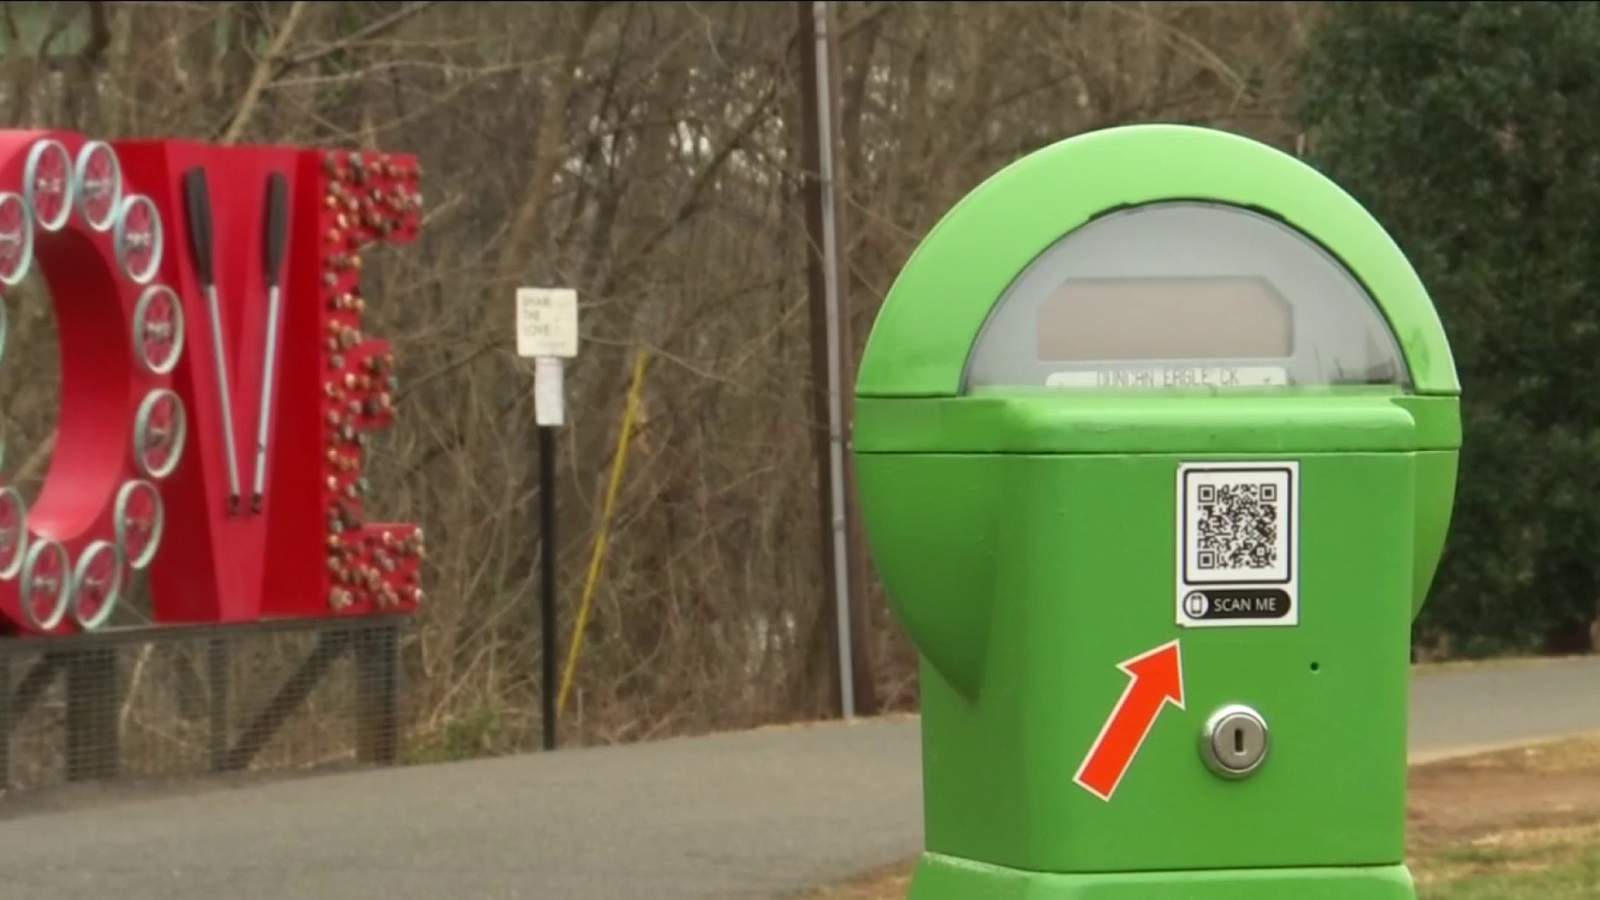 Lynchburg’s repurposed parking meters lead to $4,000 donation